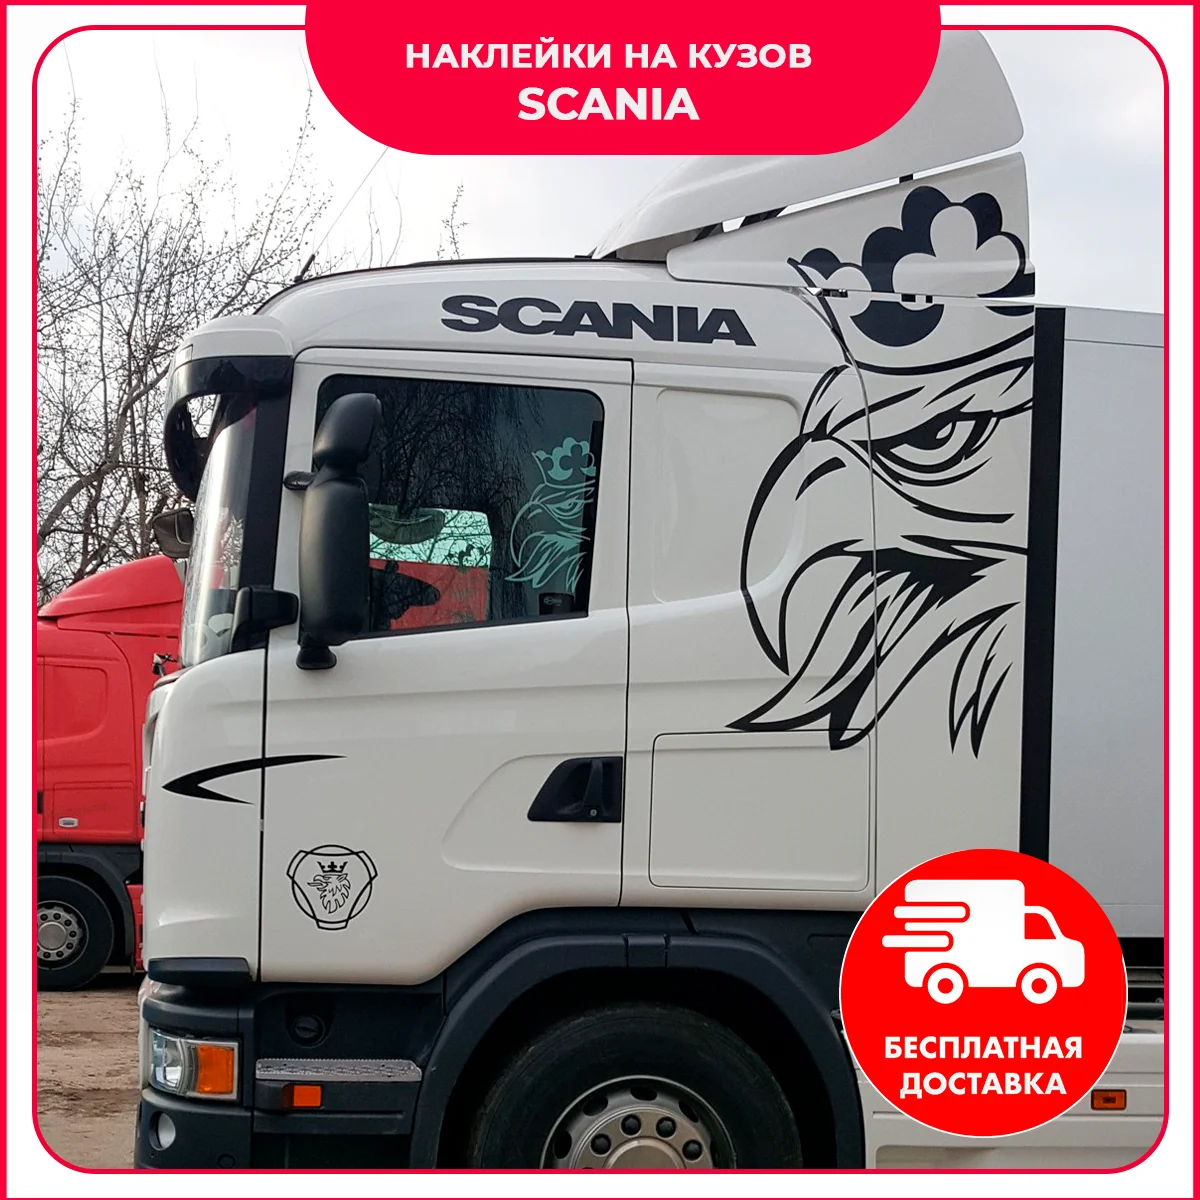 X2 Scania stickers on the cabin. Tuning For Sale. Stickers on the truck.